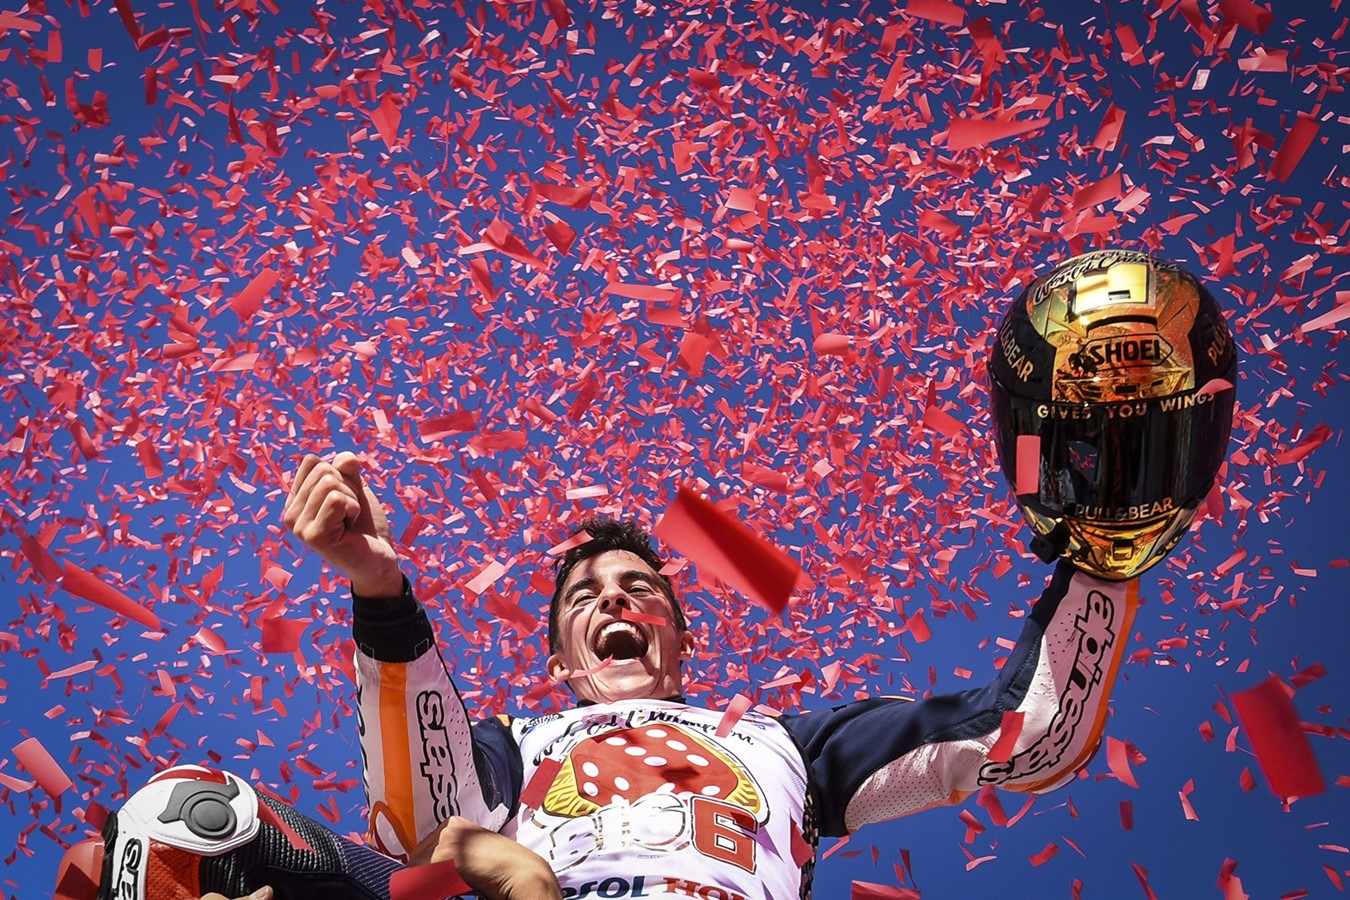 Marc Marquez Wins Second Straight MotoGP Riders Title, Honda Takes the Triple Crown